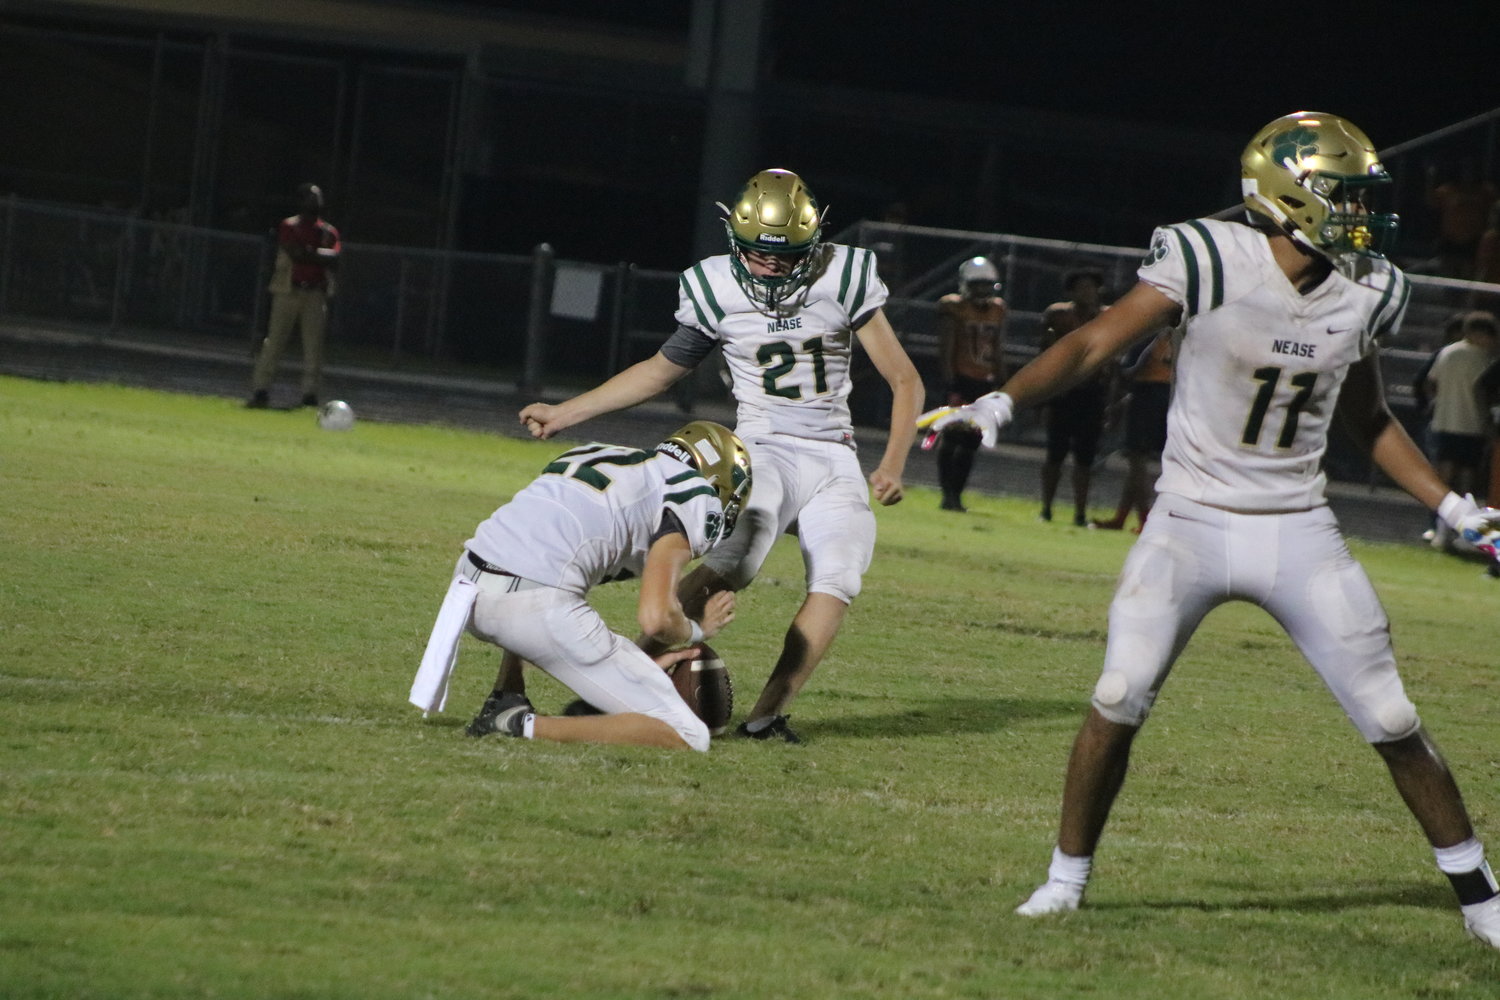 Cannon Kimball kicks a field goal from the hold of Evan Crenshaw earlier in the year. He kicked the game-winning 26-yard field goal with 18 seconds left to beat Port Orange Spruce Creek in the first round of the 7A playoffs.